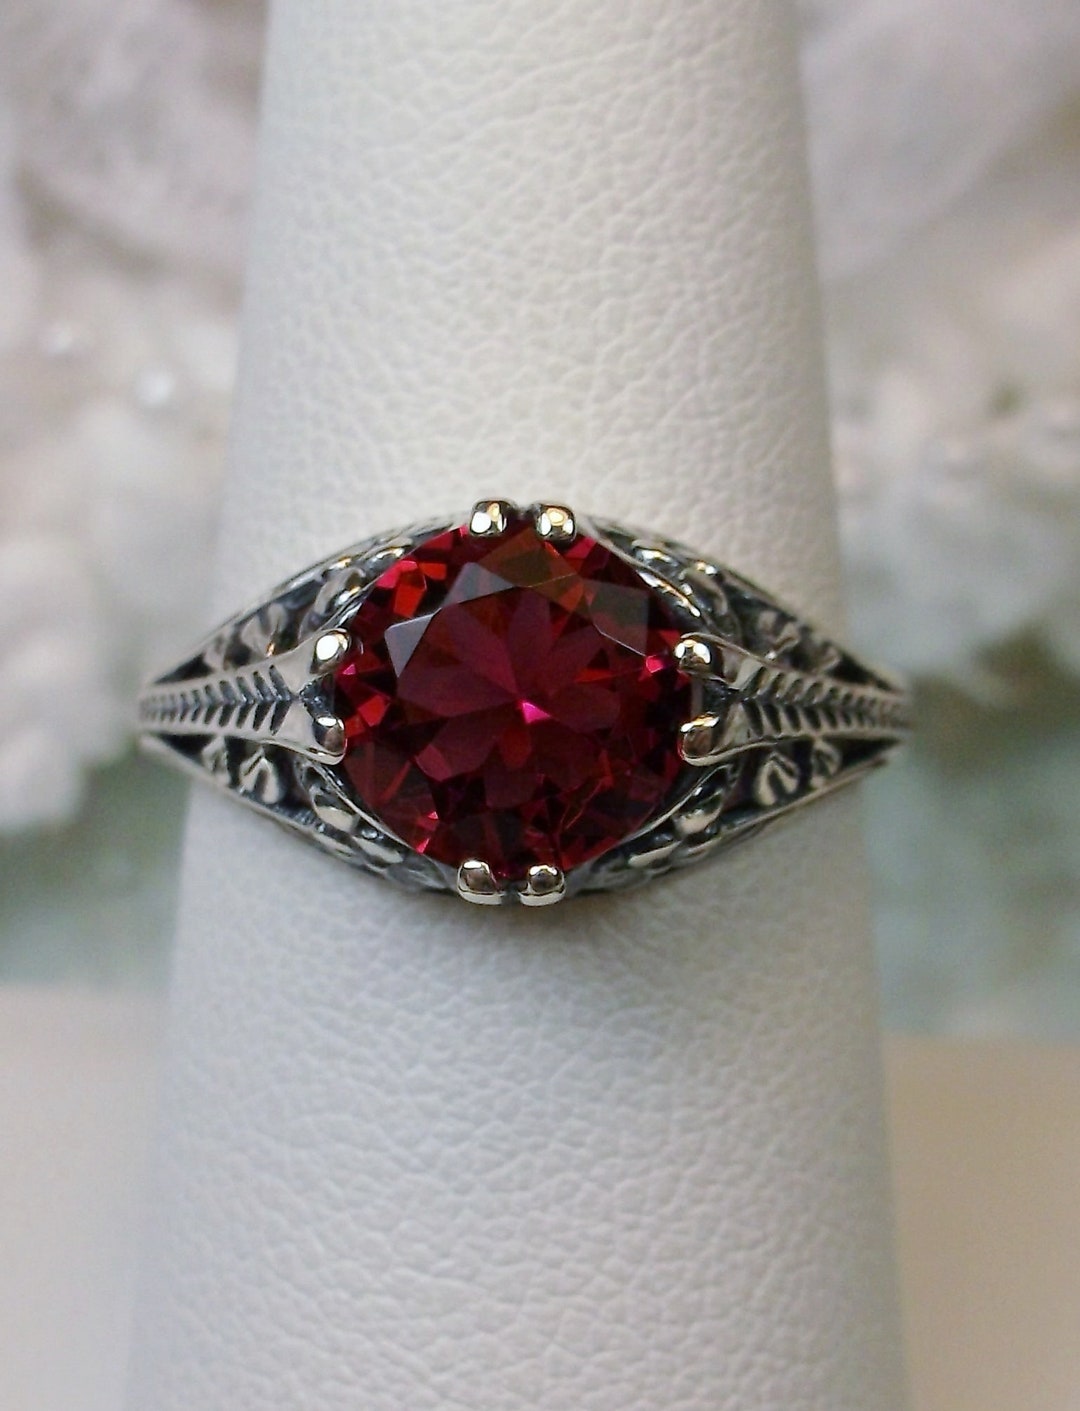 Red Ruby Ring/ Solid Sterling Silver / 2ct Simulated Red Ruby Edwardian ...